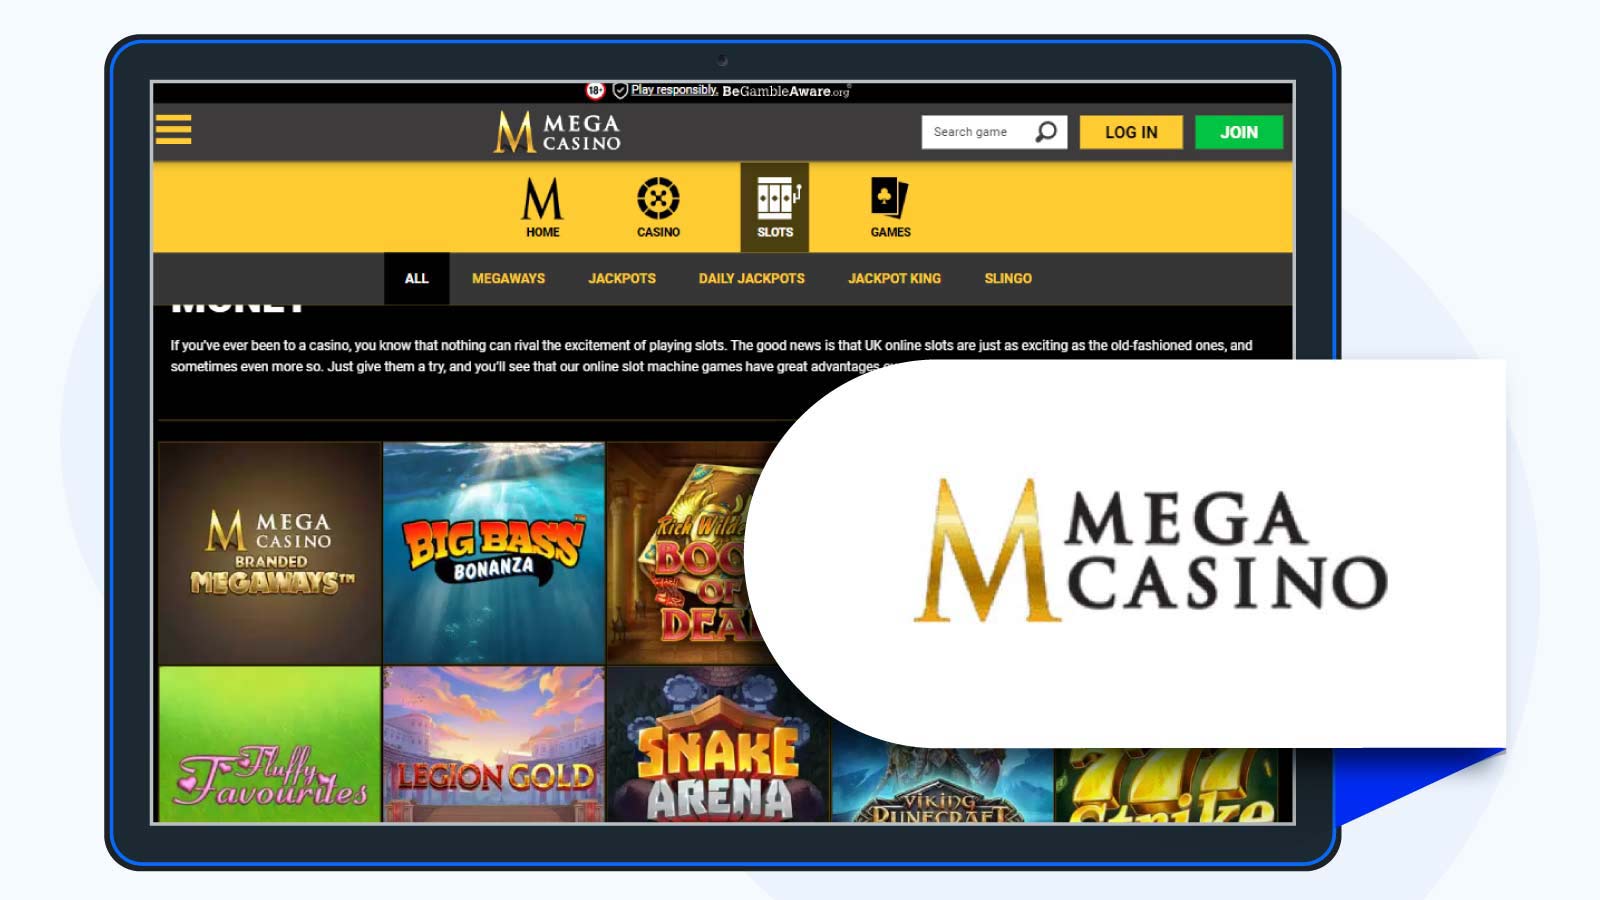 Mega-Casino-Best-Sofort-Casino-in-the-UK-with-Numerous-Promotional-Offers